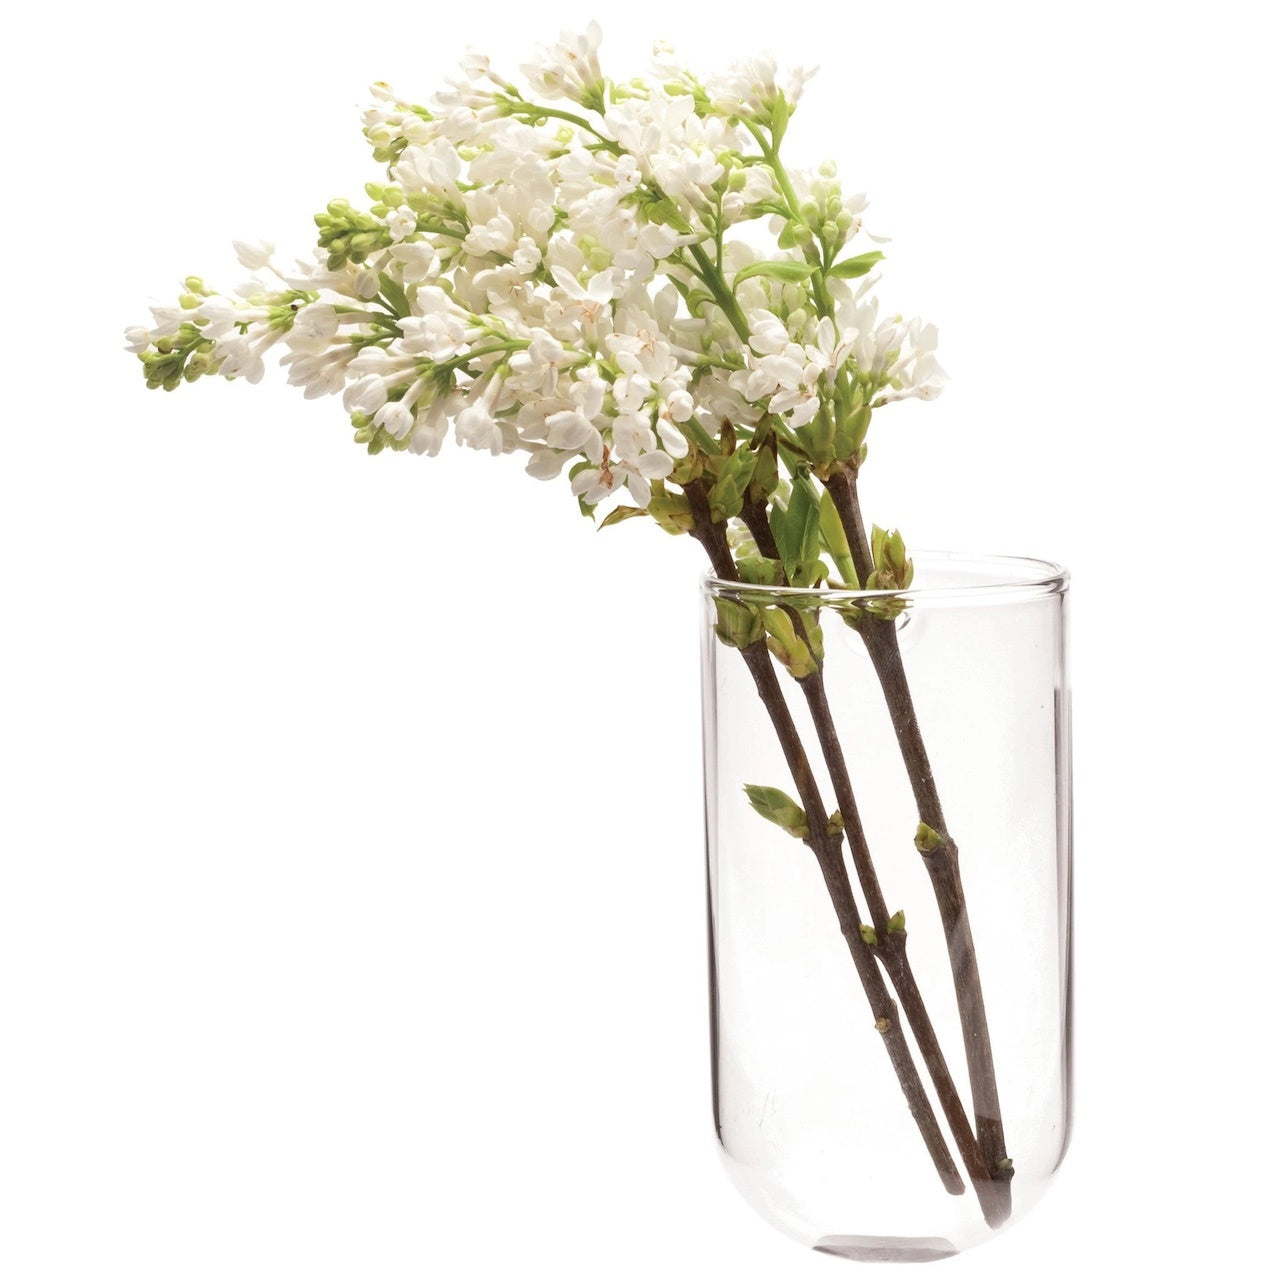 Hudson 2 wall cup glass planter vase